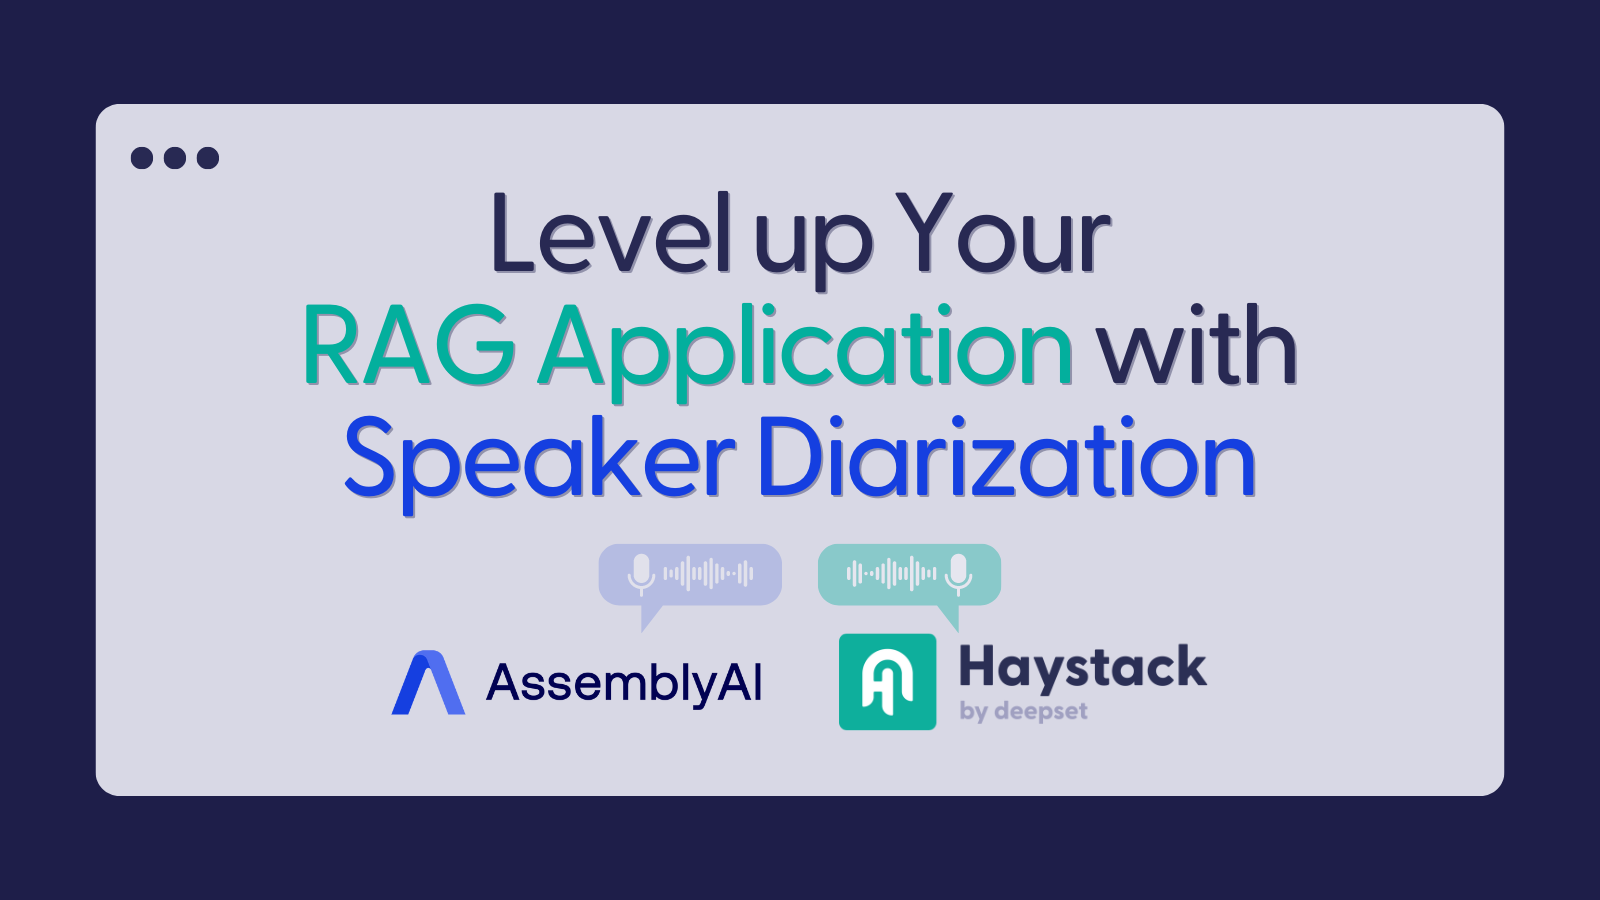 'Level up Your RAG Application with Speaker Diarization' text with AssemblyAI and Haystack logos